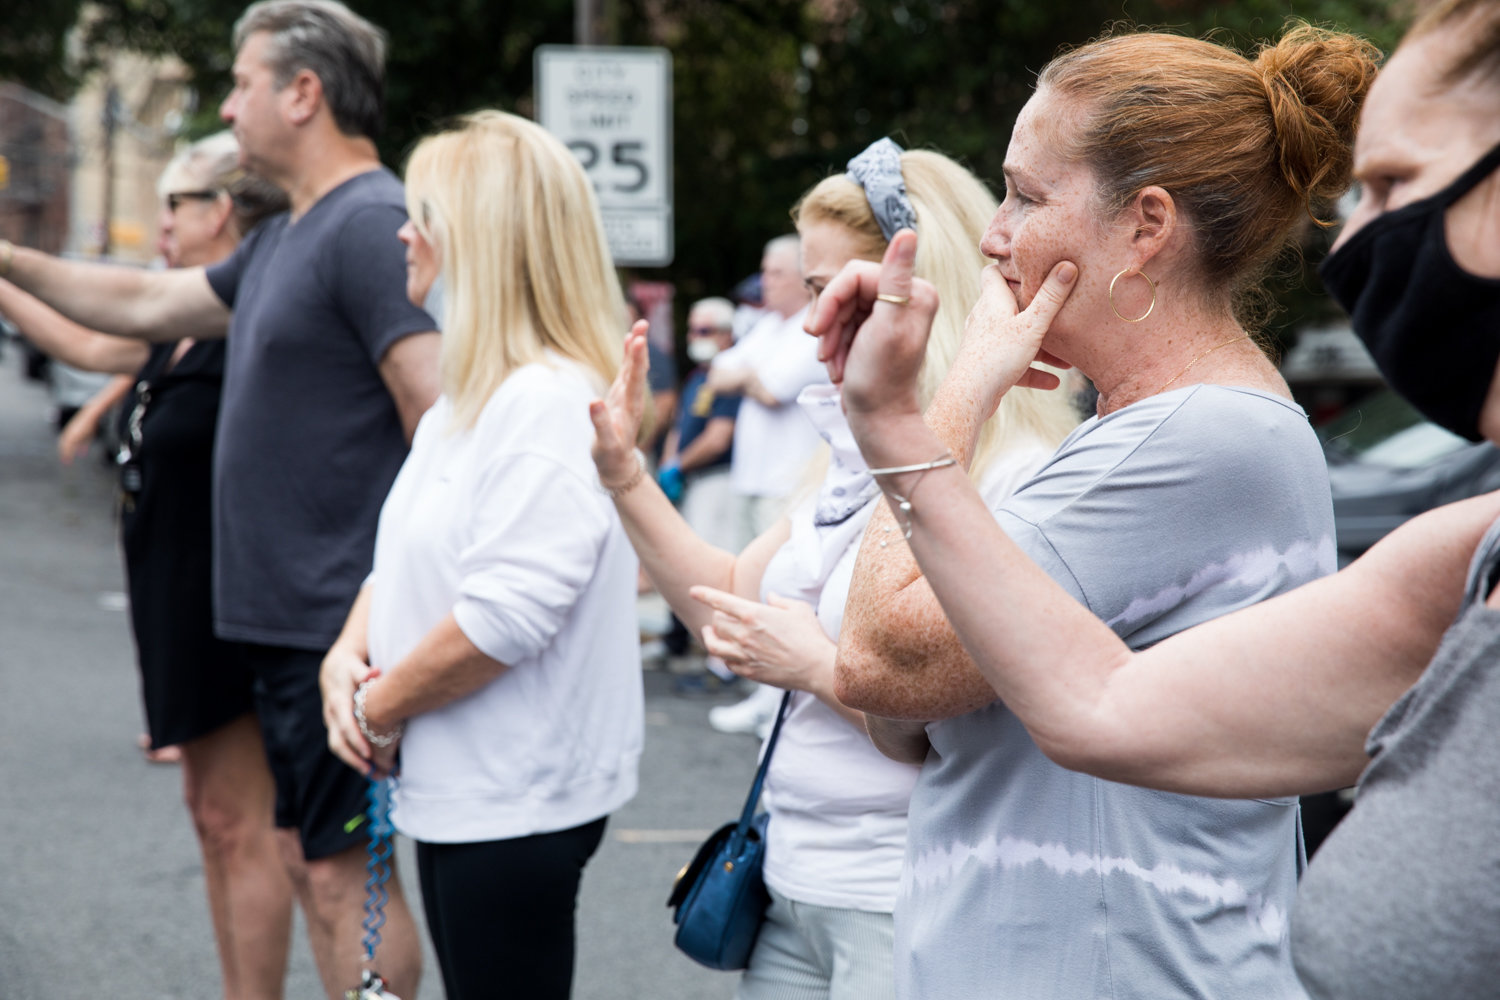 Mourners wave at a funeral procession for the late Michael Rooney on Mosholu Avenue. The procession down the avenue where Rooney lived was organized in light of the coronavirus pandemic to give those who knew him a chance to gather.